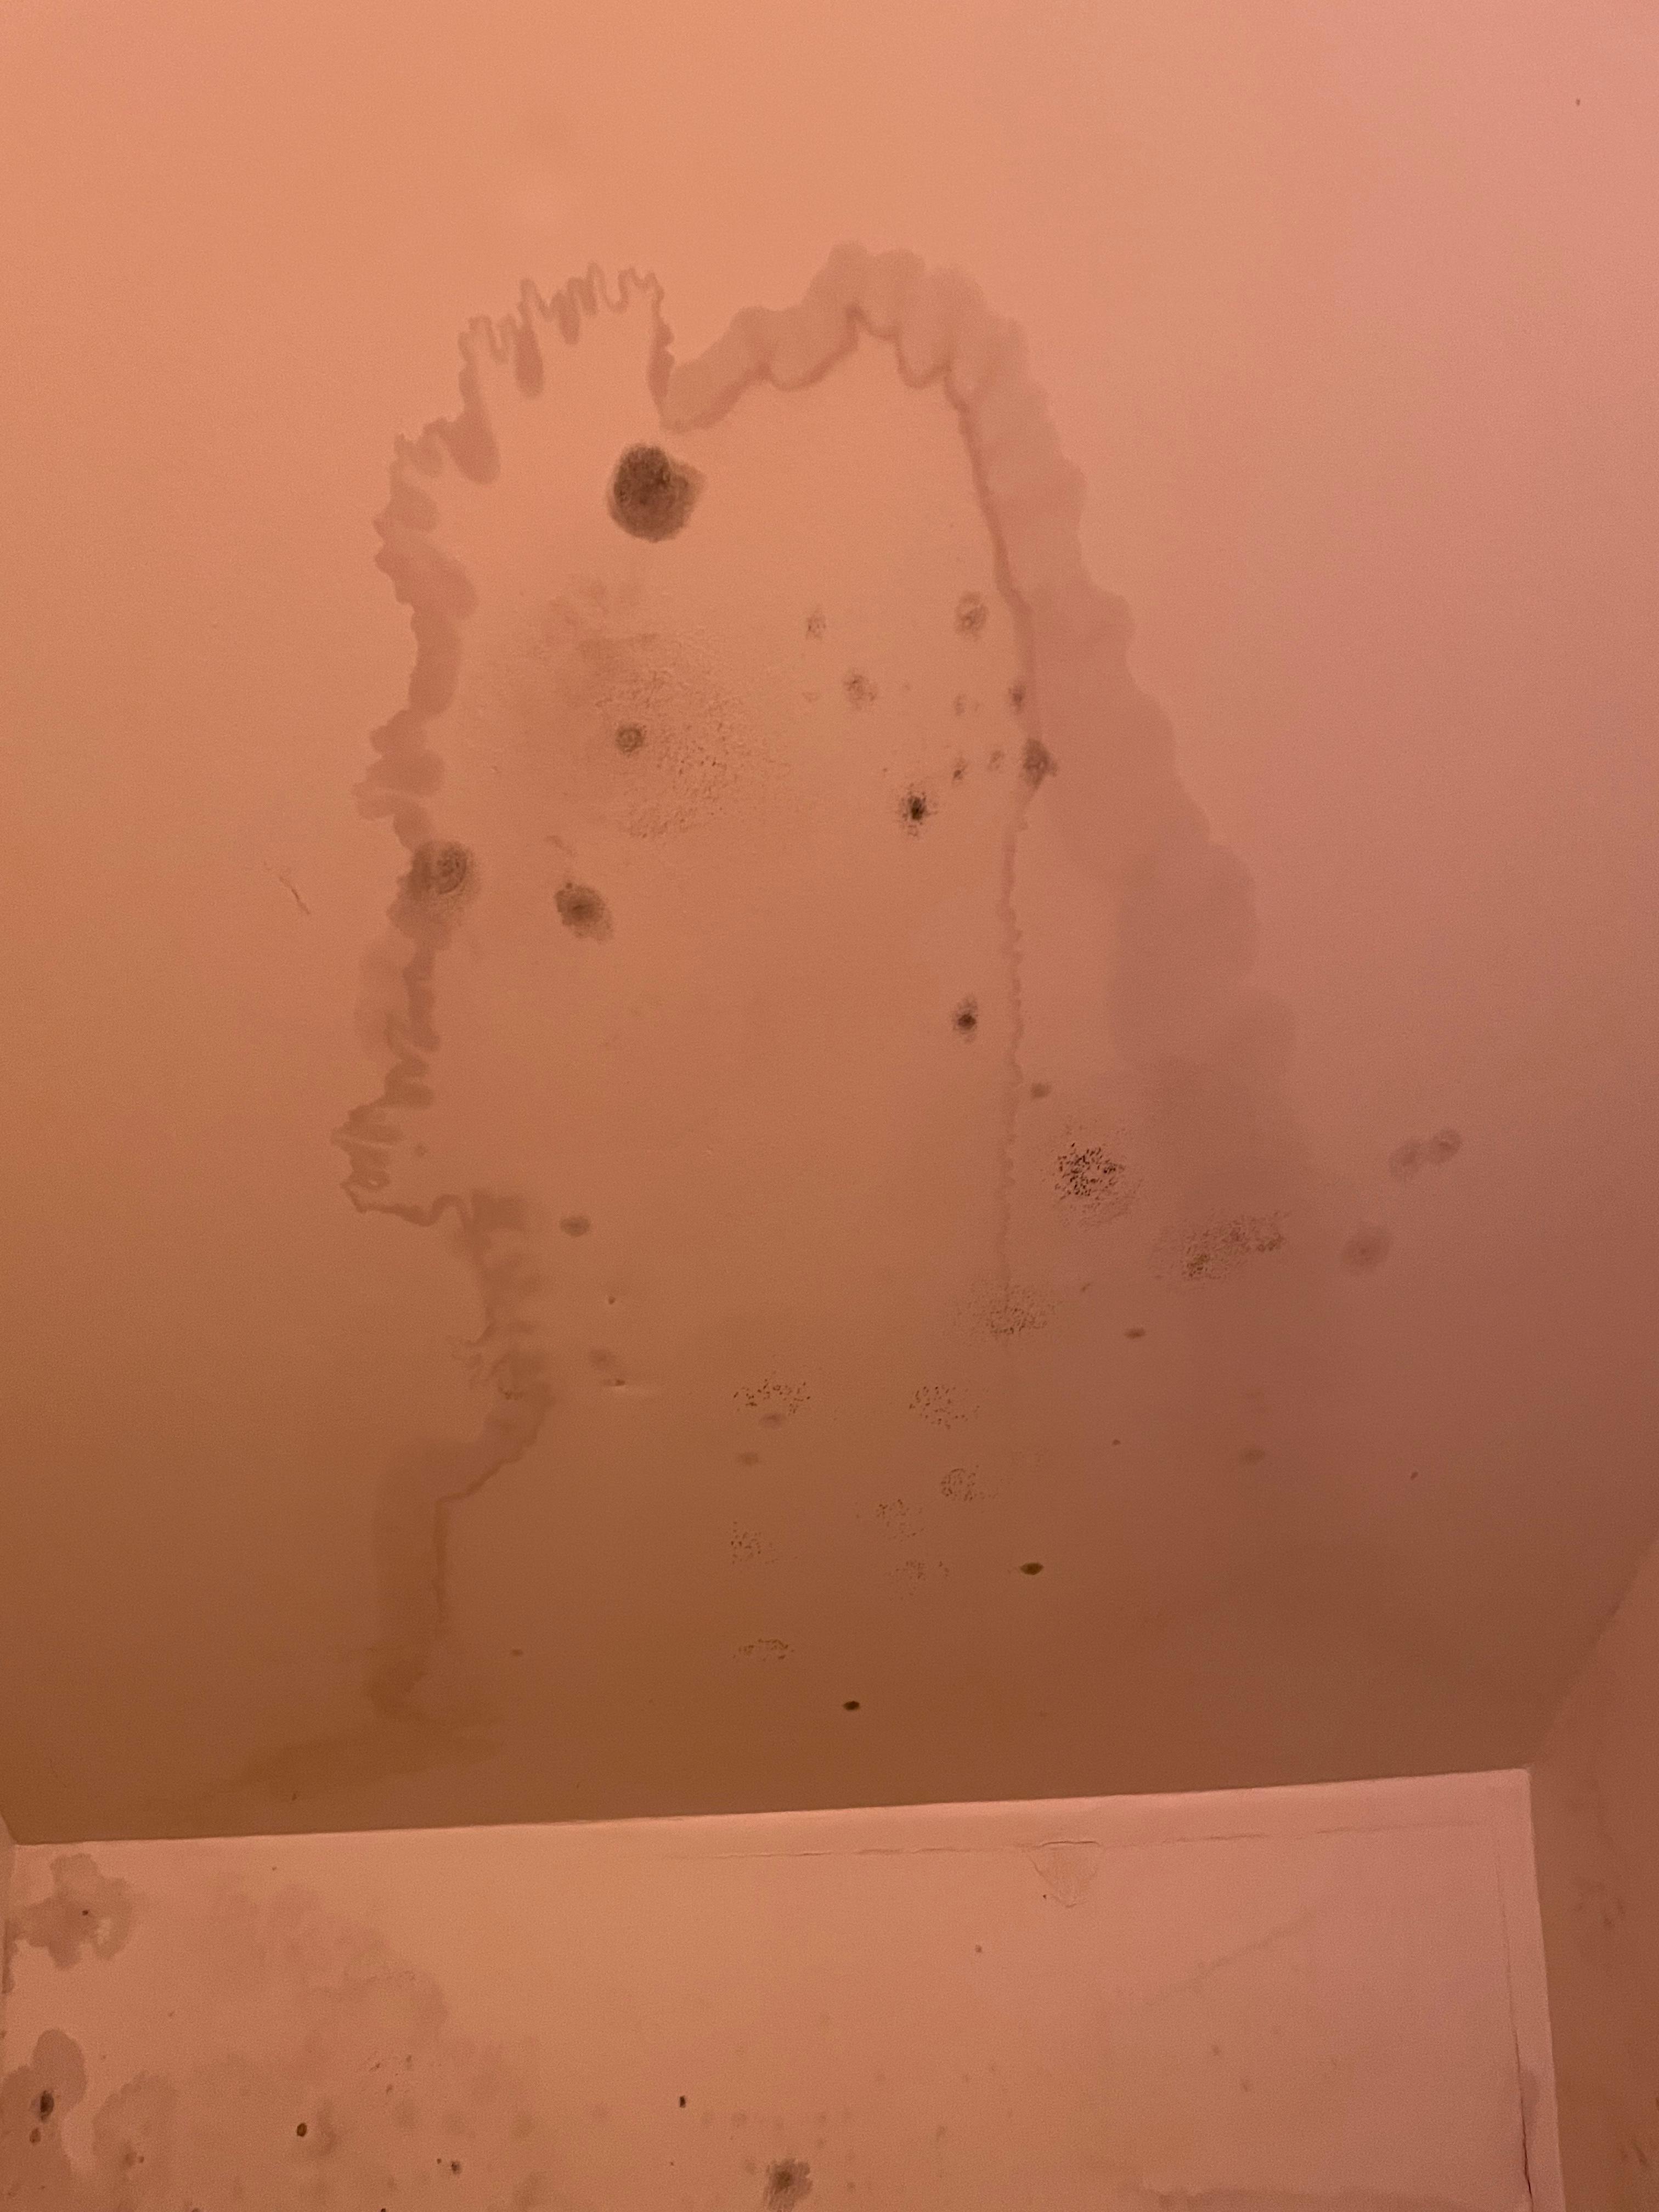 Water damage can quickly turn into a full blown mold infestation. It is important to call your local SERVPRO team as quickly as possible after noticing signs of water and mold damage.